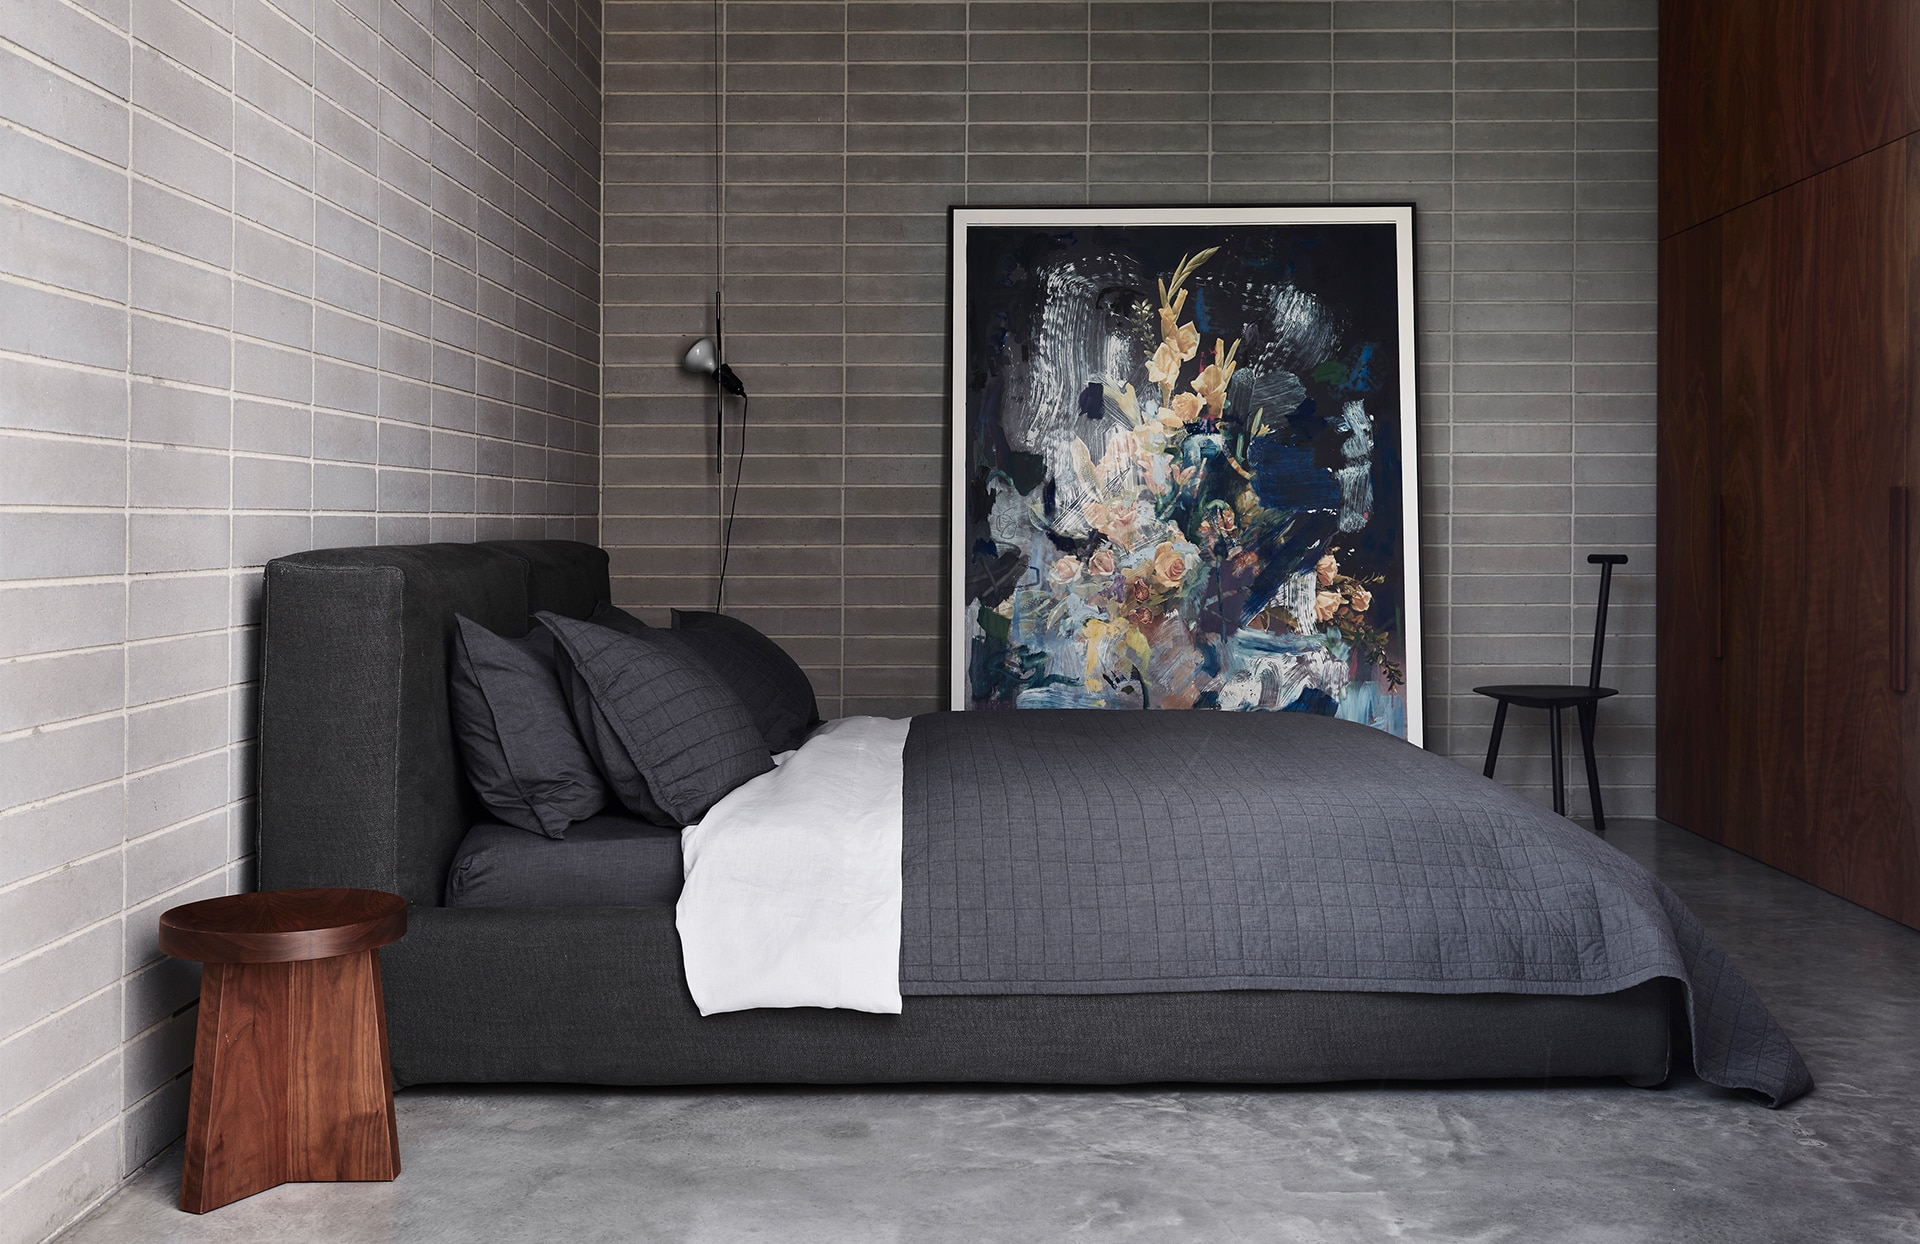 landscape image of james vivian master bedroom. textured bed frame with made up bed. carbon coloured sheeting, pillowcases and bec cover with silver linen sheet. exposed brickwork walls, with large, abstract painting leaning against one wall.